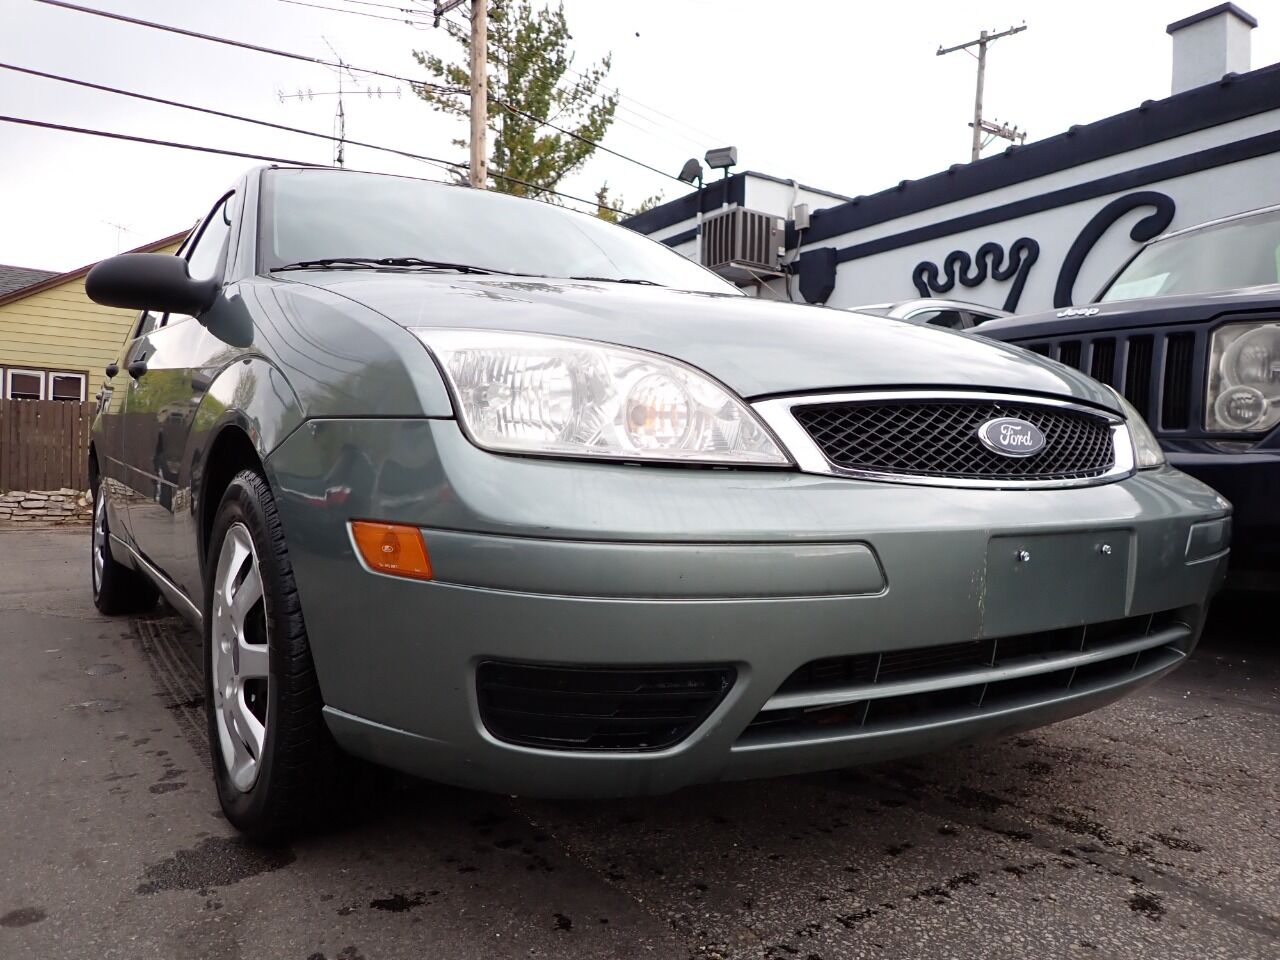 2005 Ford Focus For Sale - Carsforsale.com®